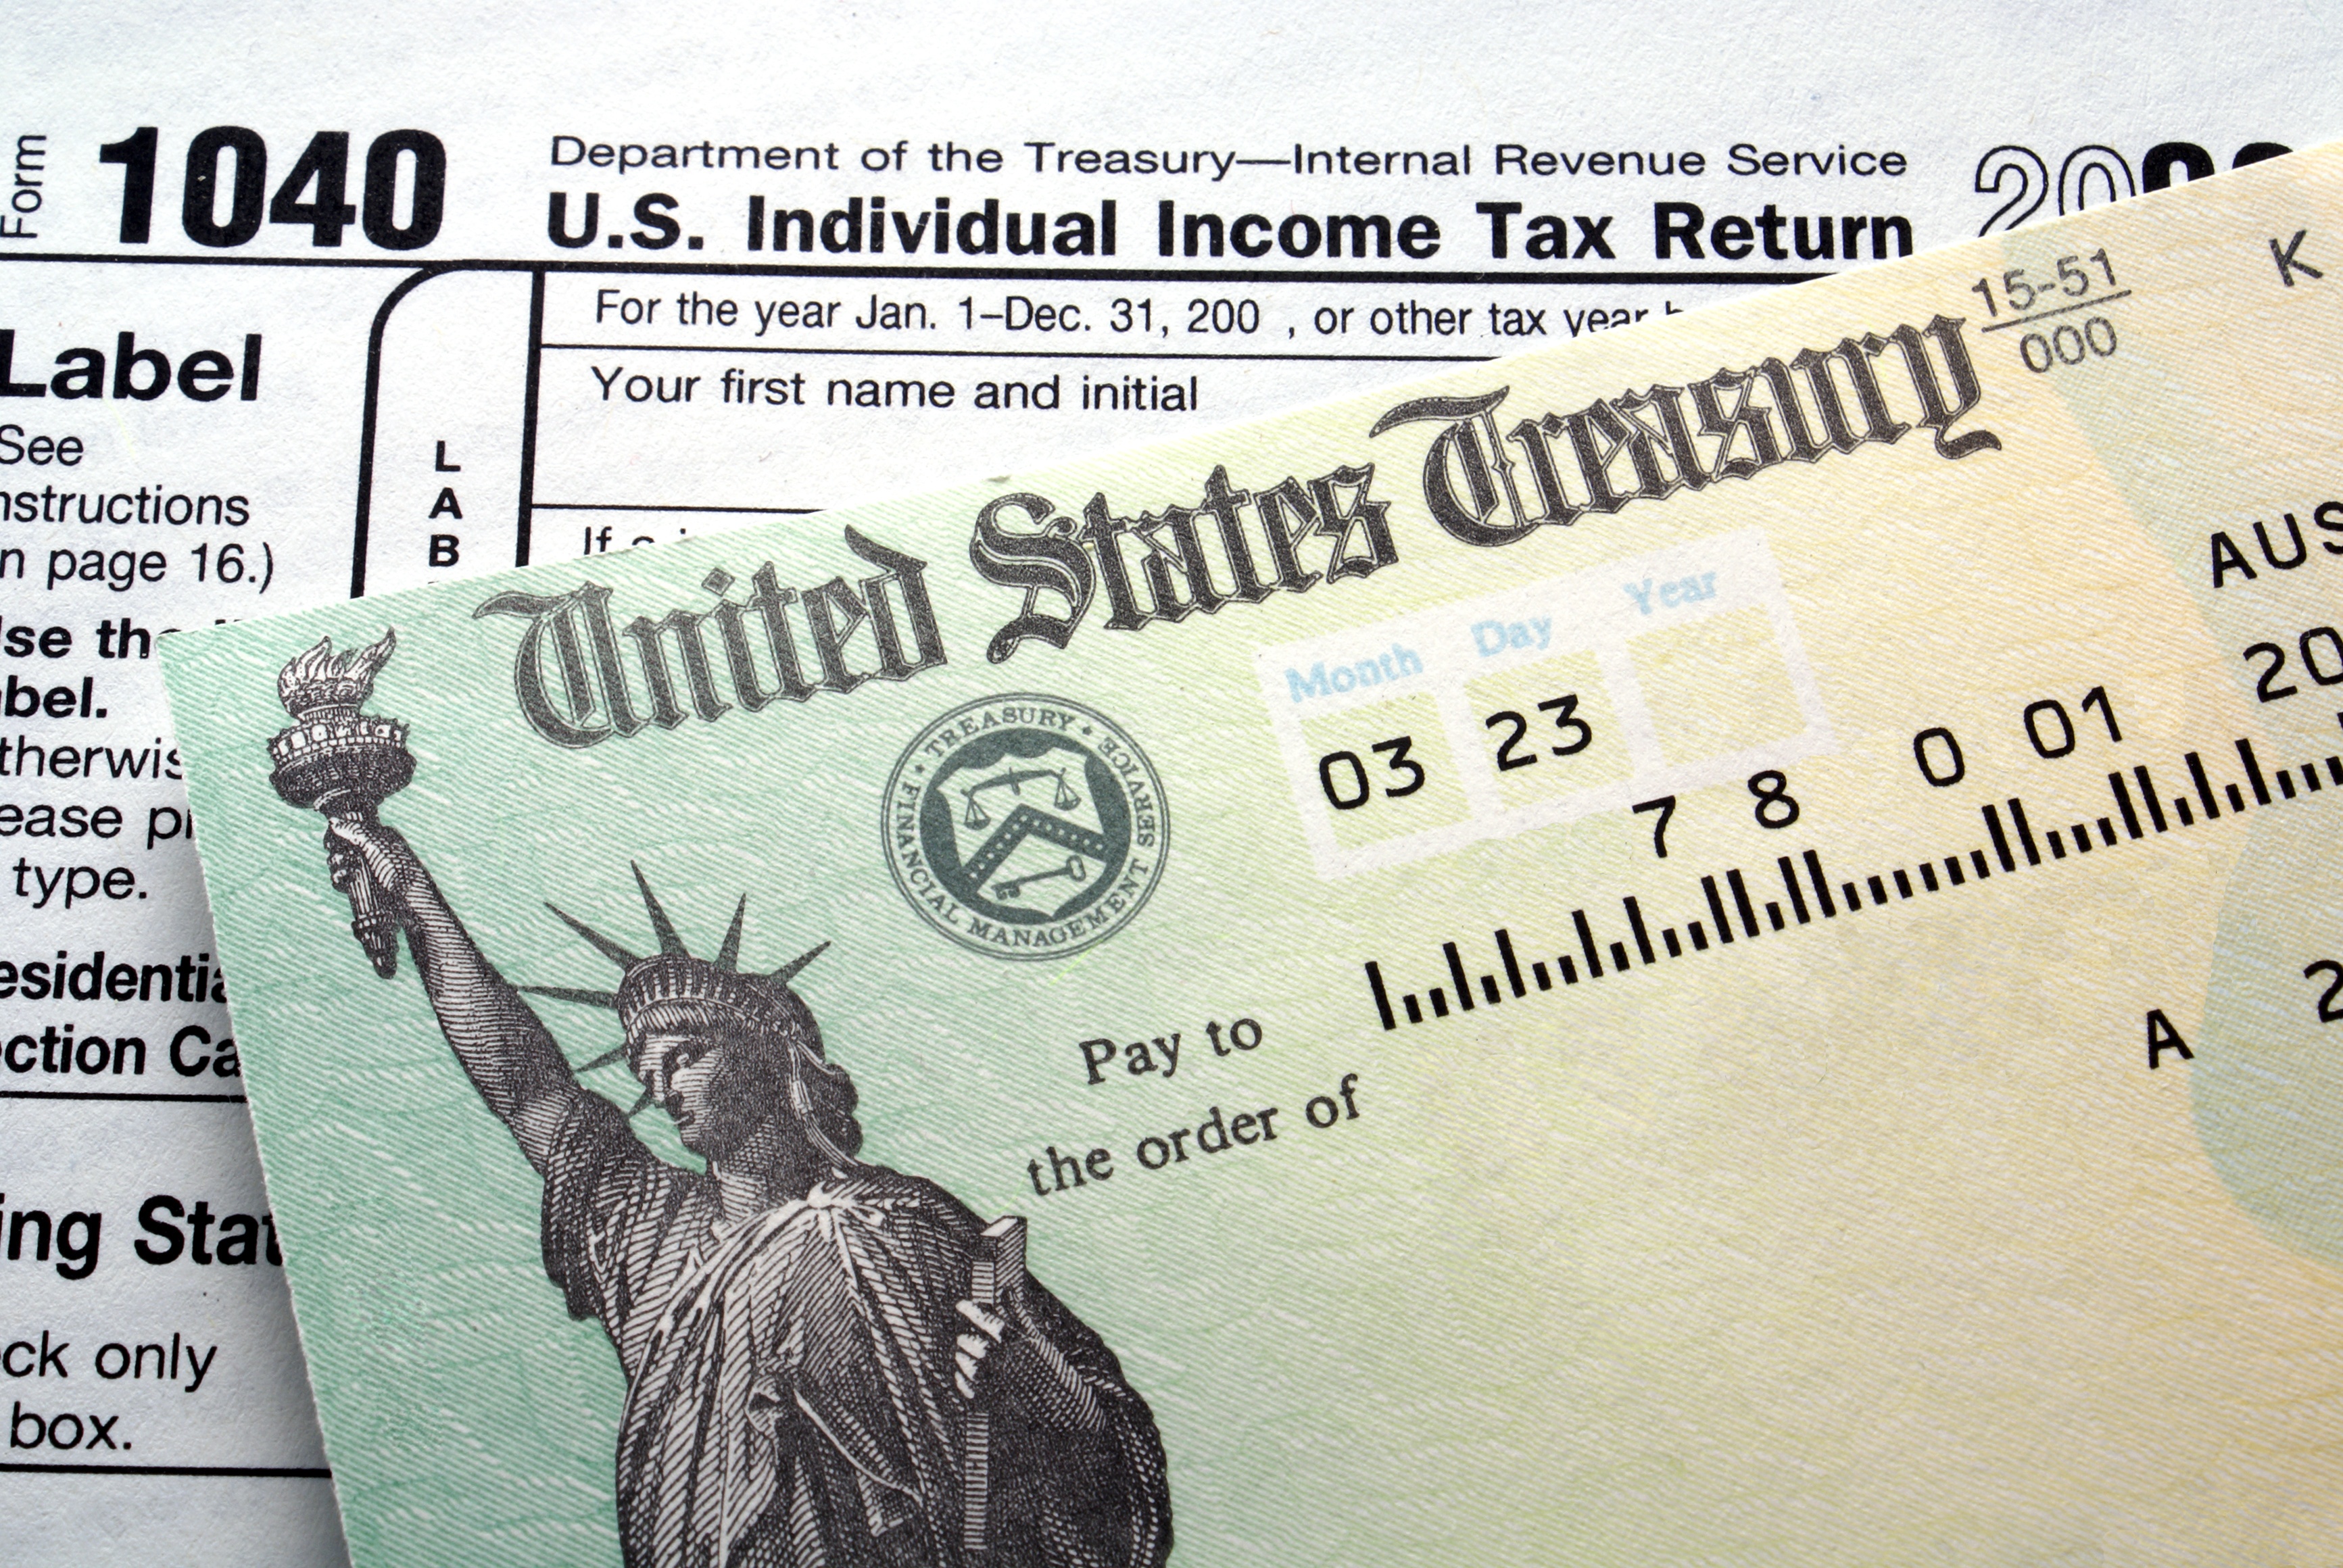 MONEY HACKS: What's the Best Money Move for Your Tax Refund?